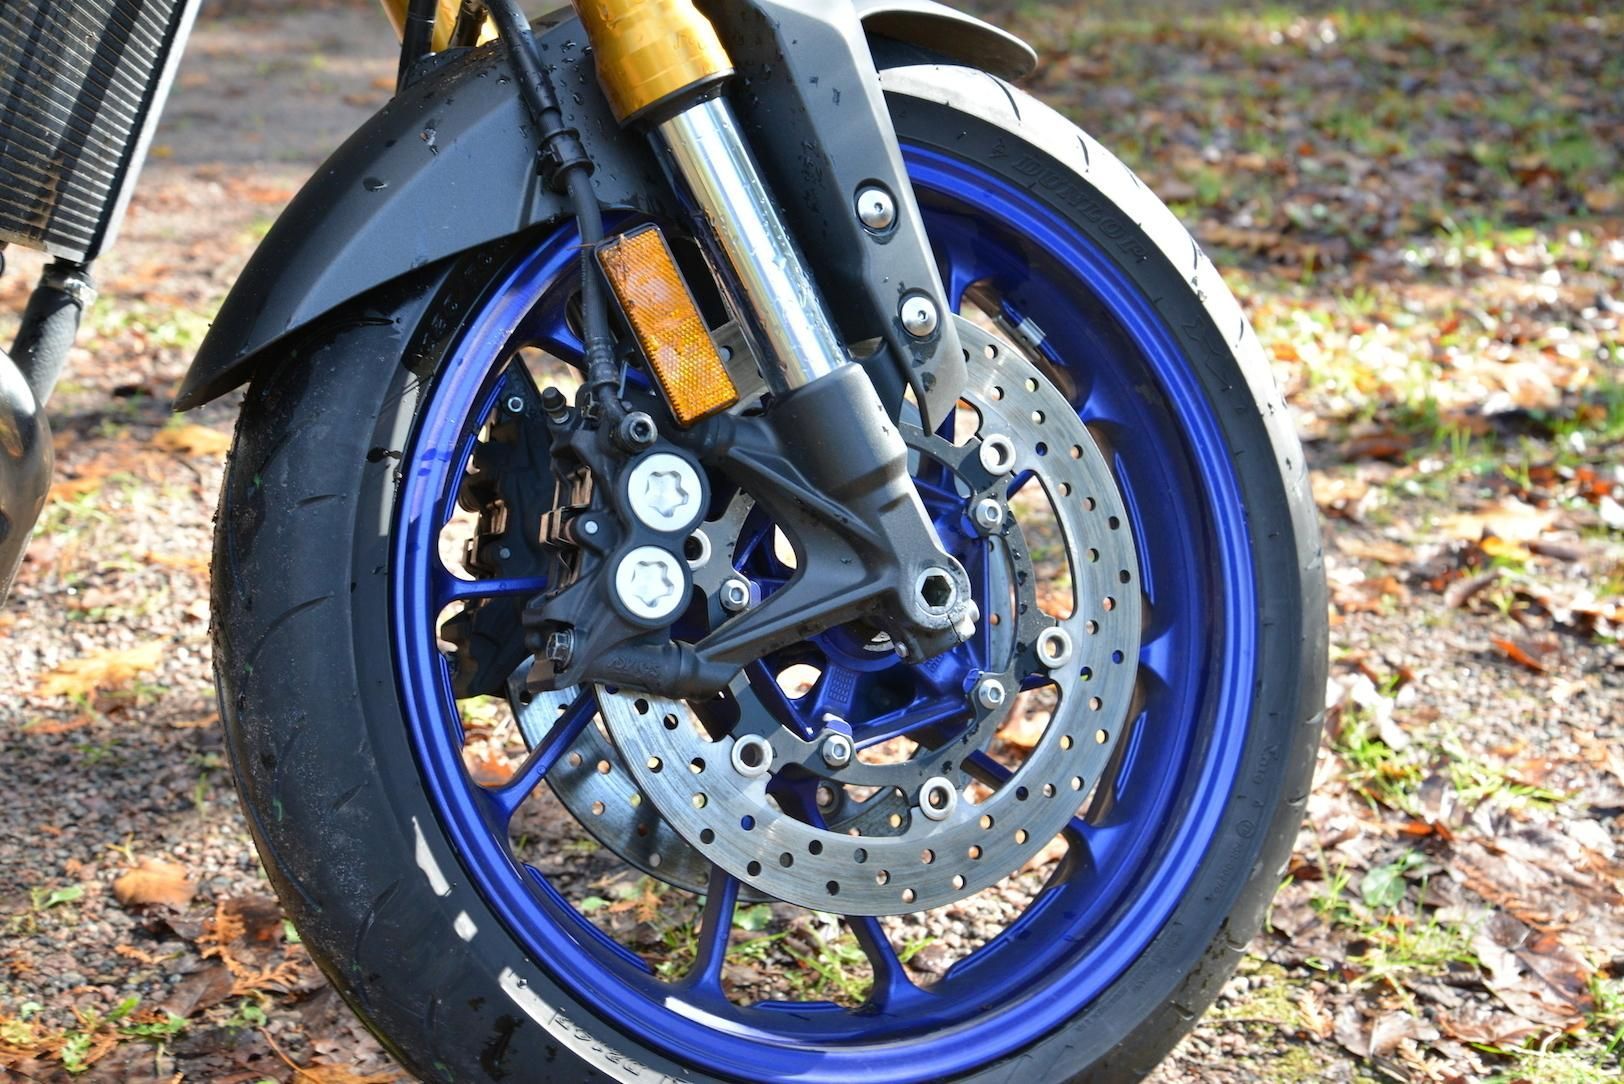 FZ09 - Blue wheels look out of place